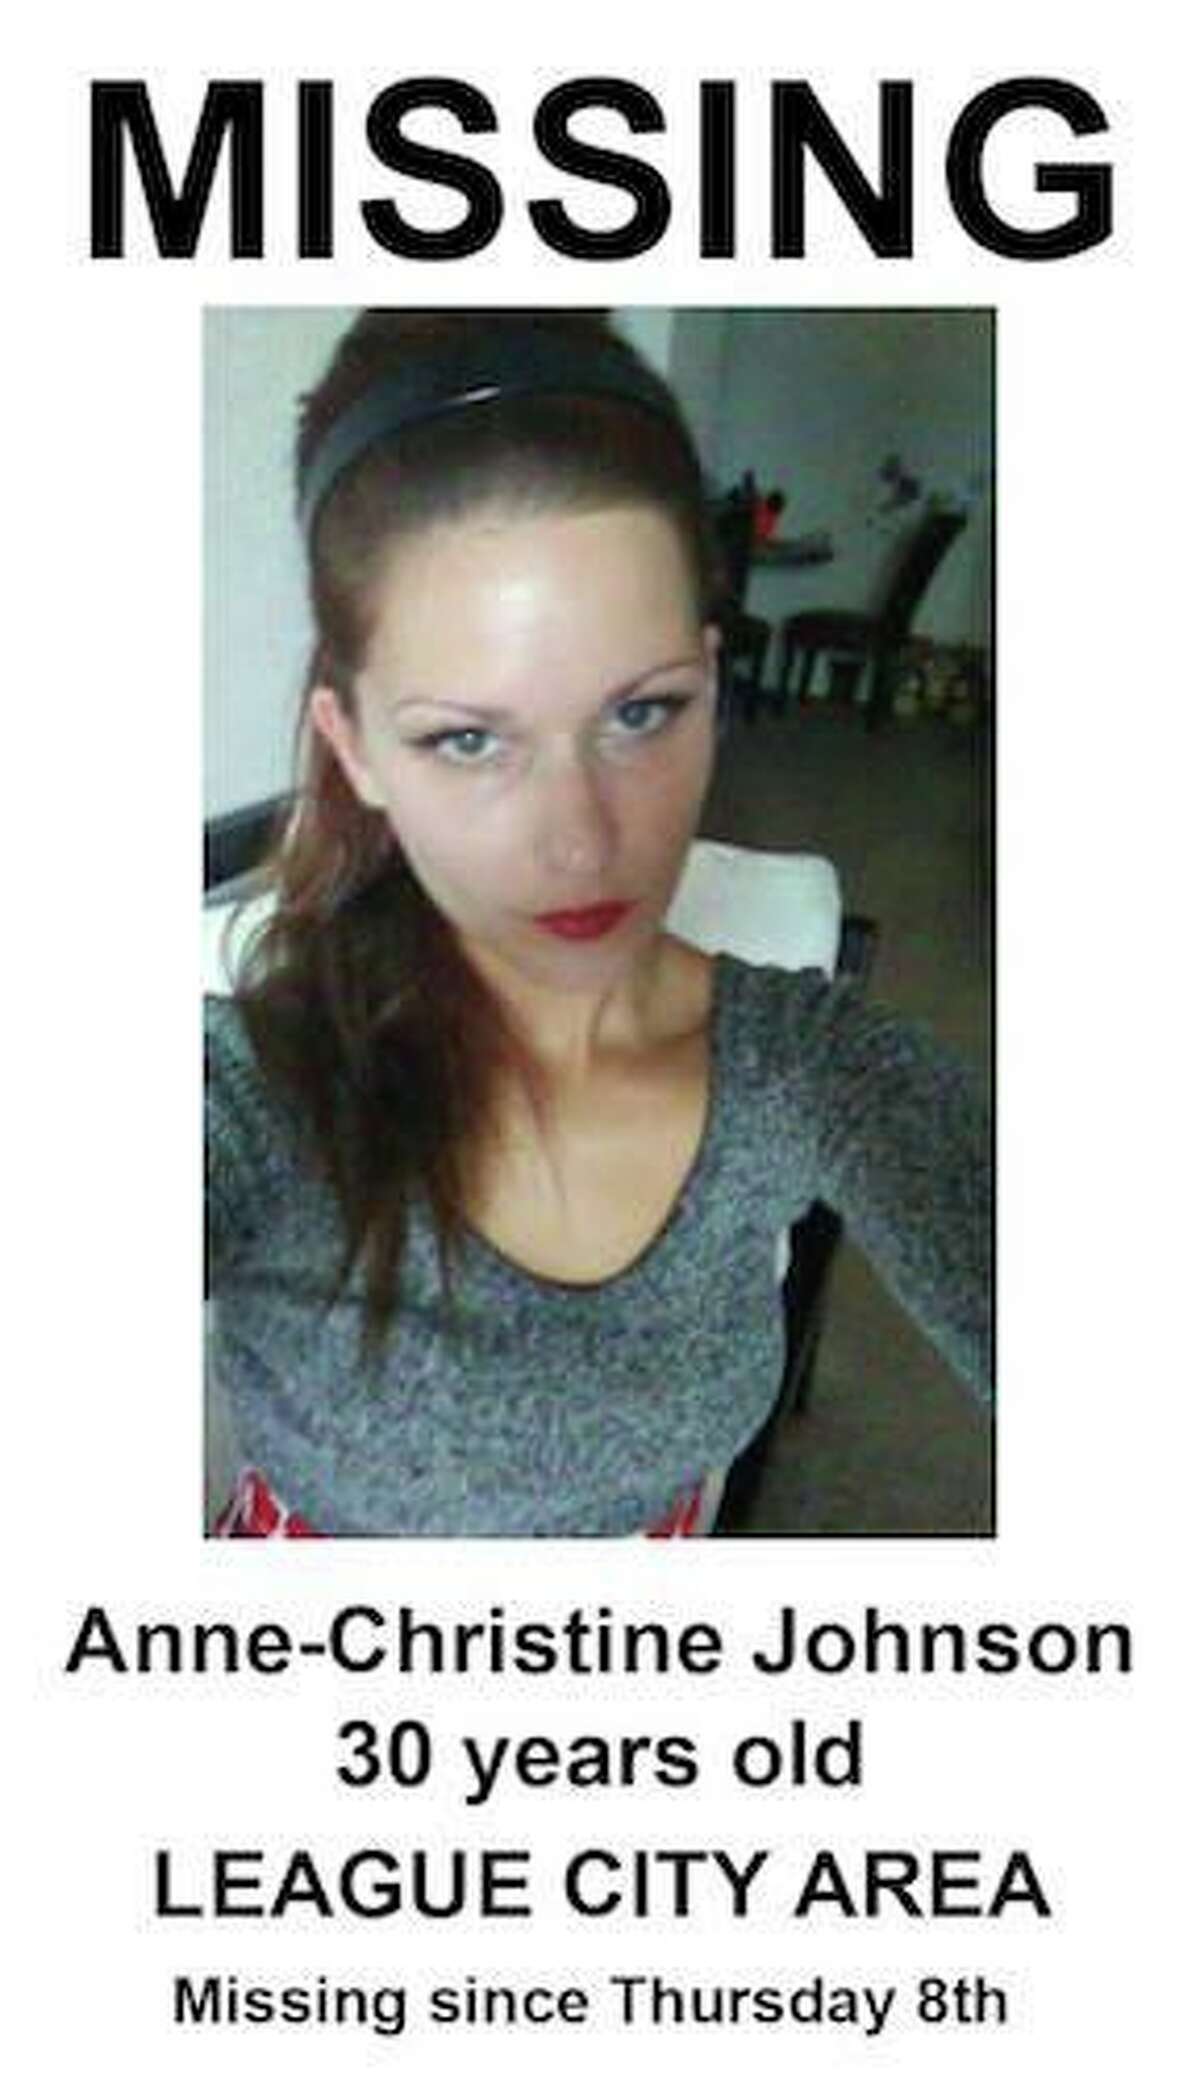 A “Missing” poster for Anne-Christine Johnson, 30, who was reported missing Monday, December 12, 2016 by her father. Her body was found later that month in a garage at her ex-husband’s home, and he was subsequently convicted of murder.